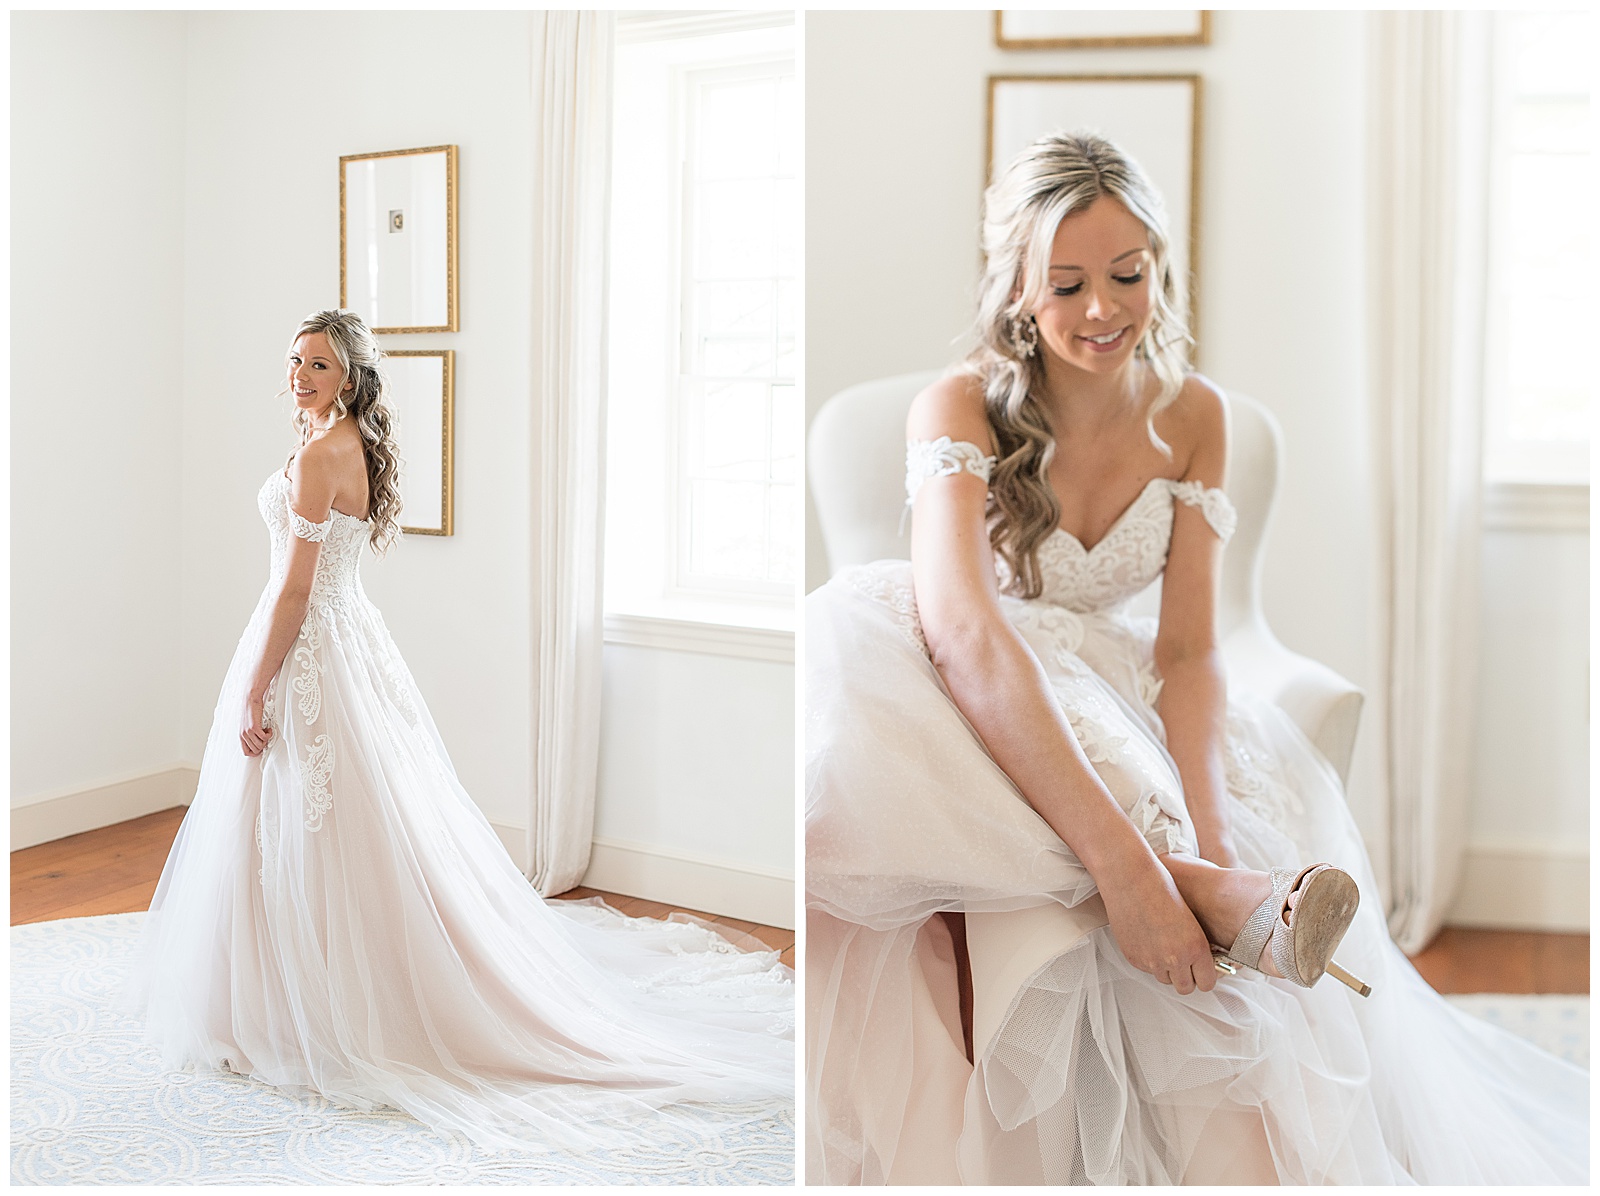 bride putting on glittery high heels in bright white bridal suite at barn wedding venue